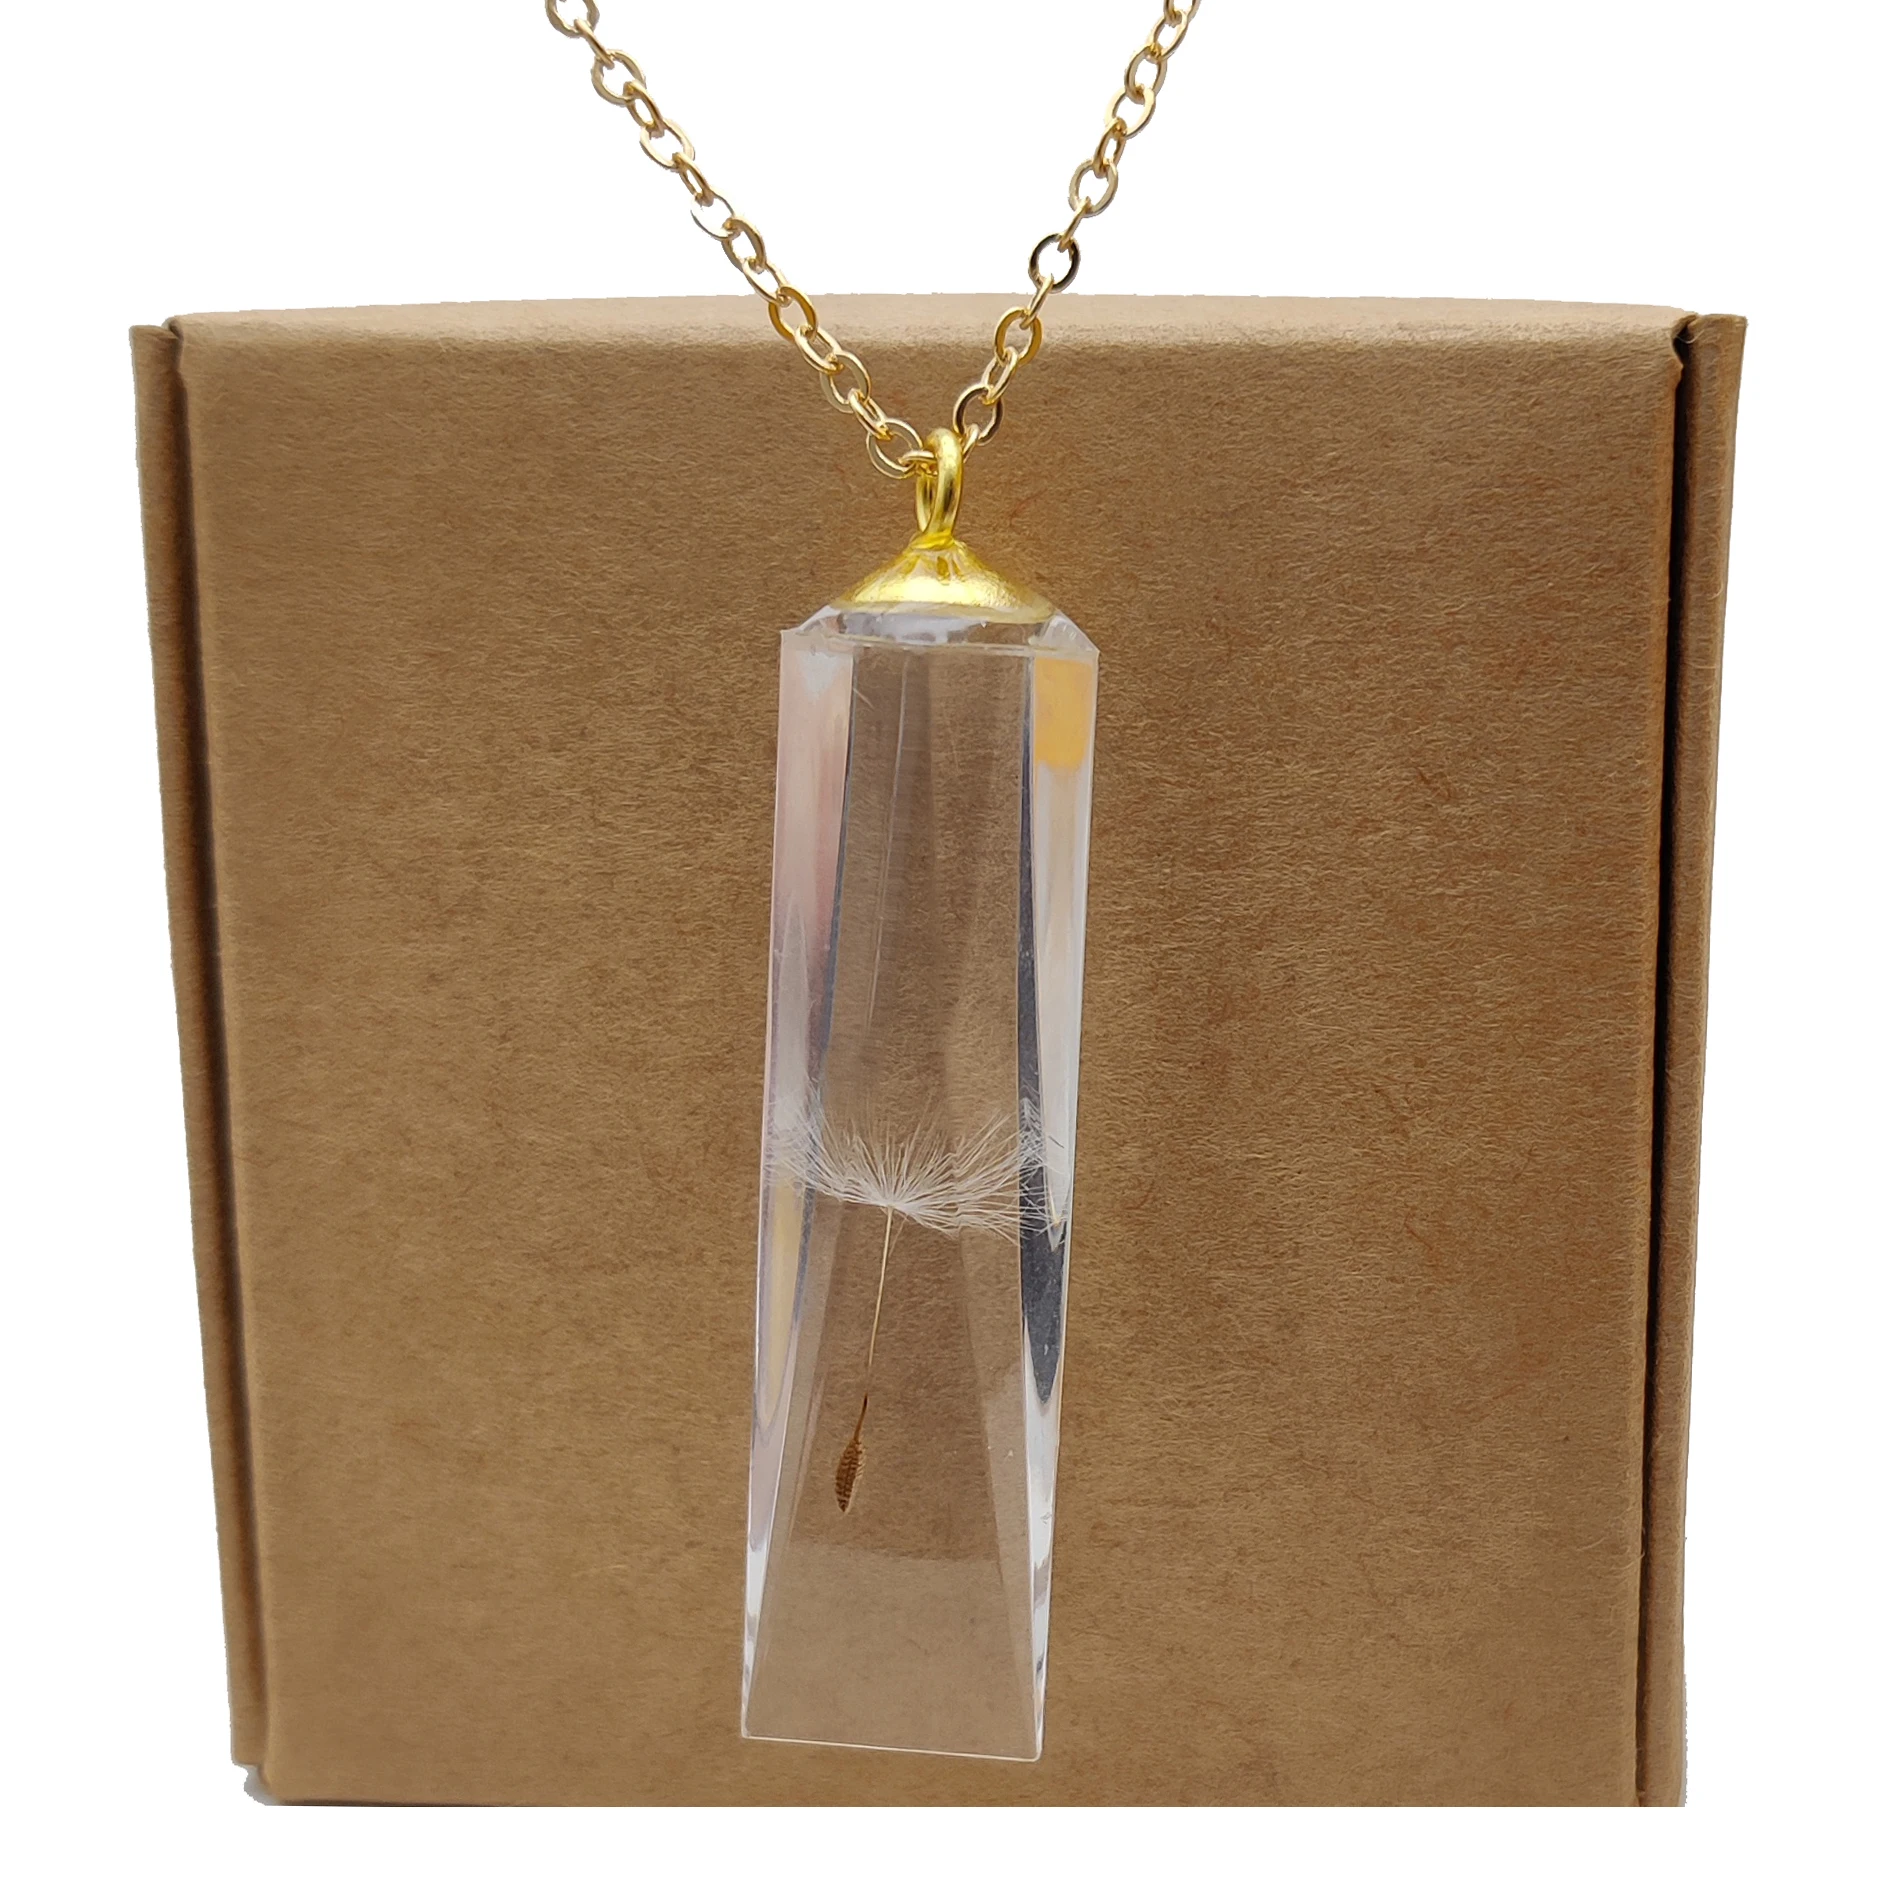 Dandelion Make a Wish Sliced Mirror Cuboid Resin Gold Color Pendant Chain Long Necklace Women Boho Jewelry Bohemian Handmade easter series gecko insect shape silicone mold make keychain pendant hangtag uv epoxy resin mold diy jewelry crafts